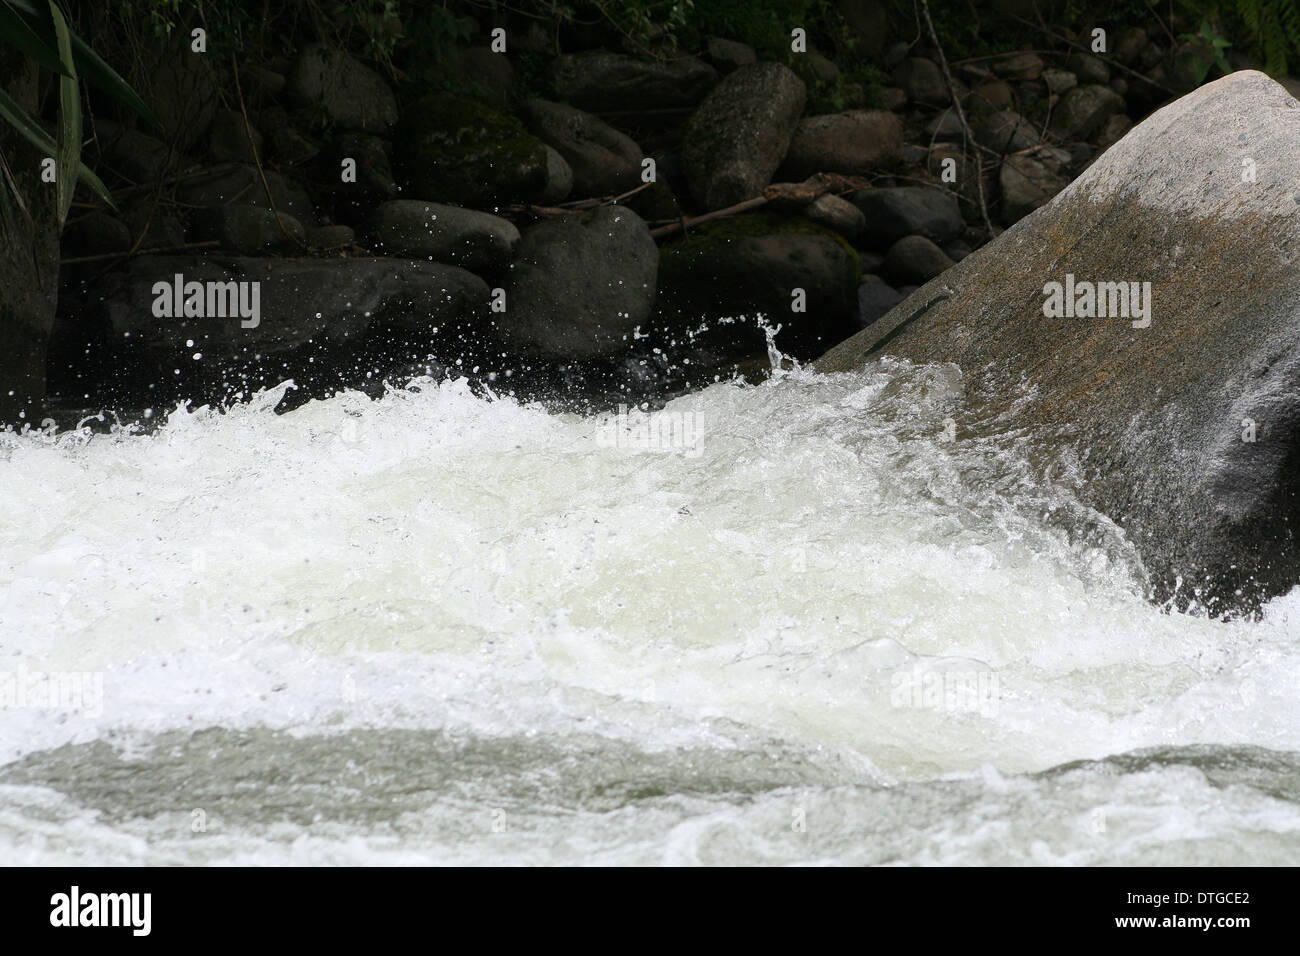 Whitewater rapids on the Intag River in  the Intag region of Ecuador Stock Photo